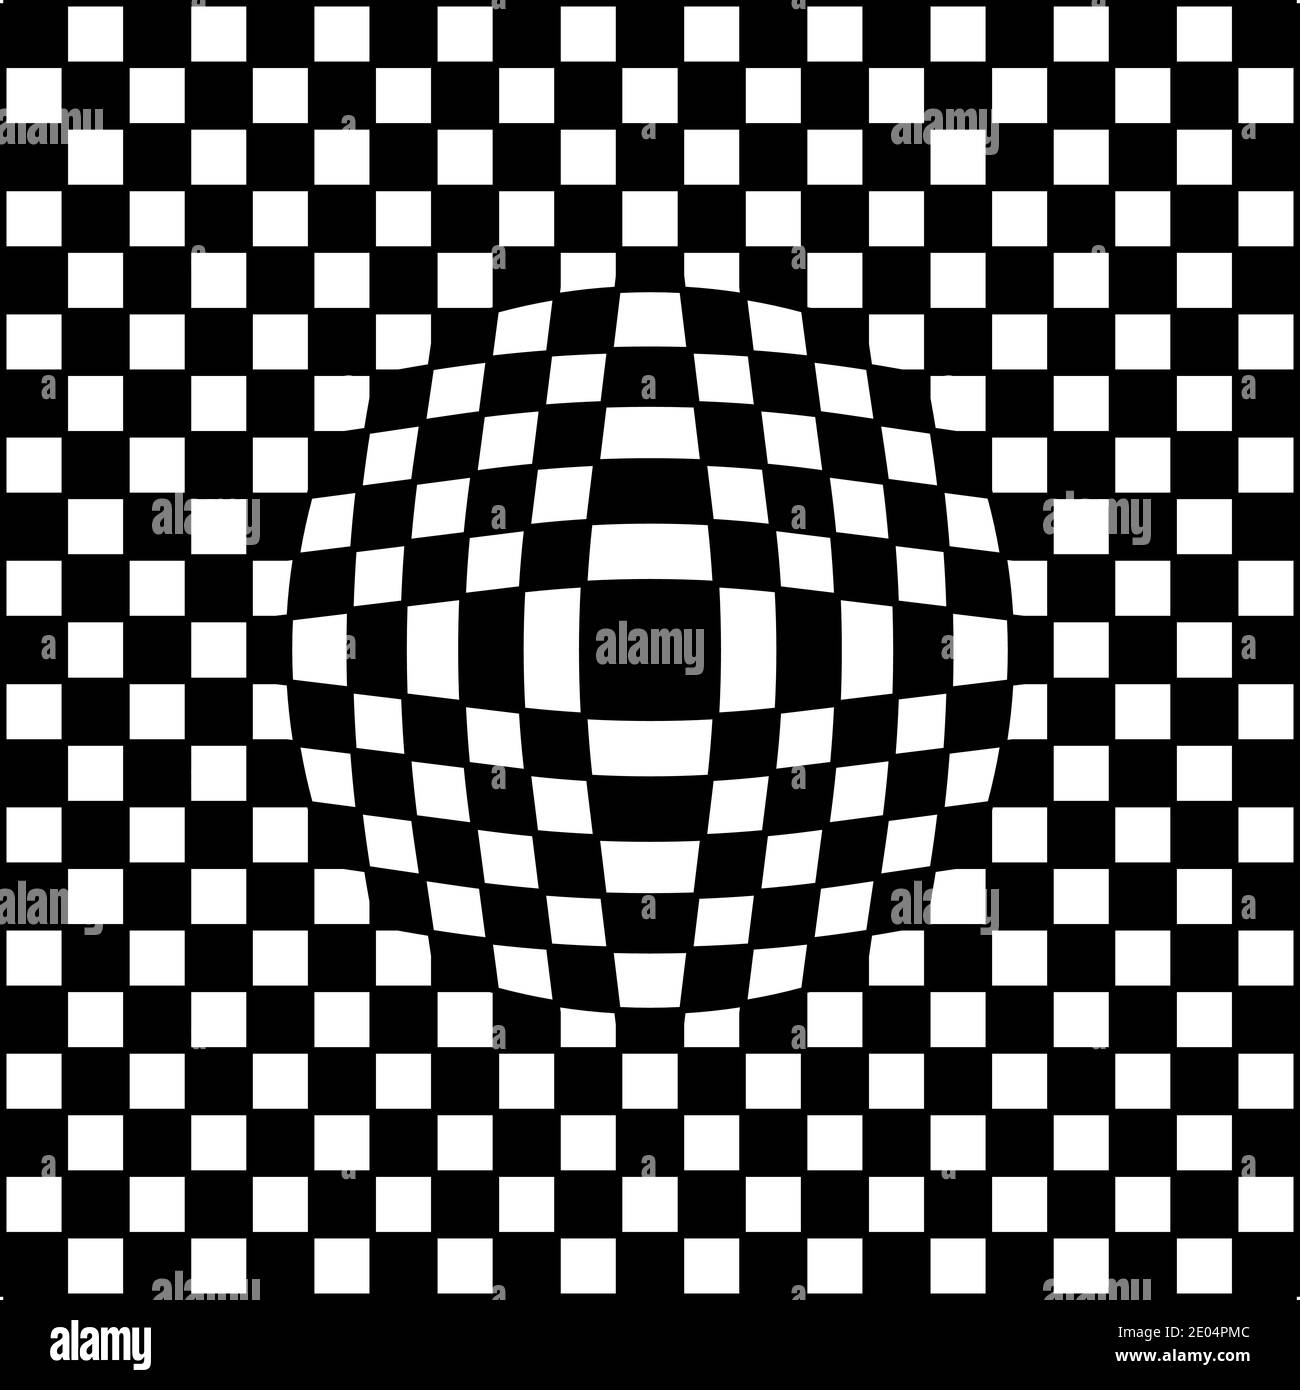 square checkered background with illusion of bloating, vector bloating checkered surface Stock Vector